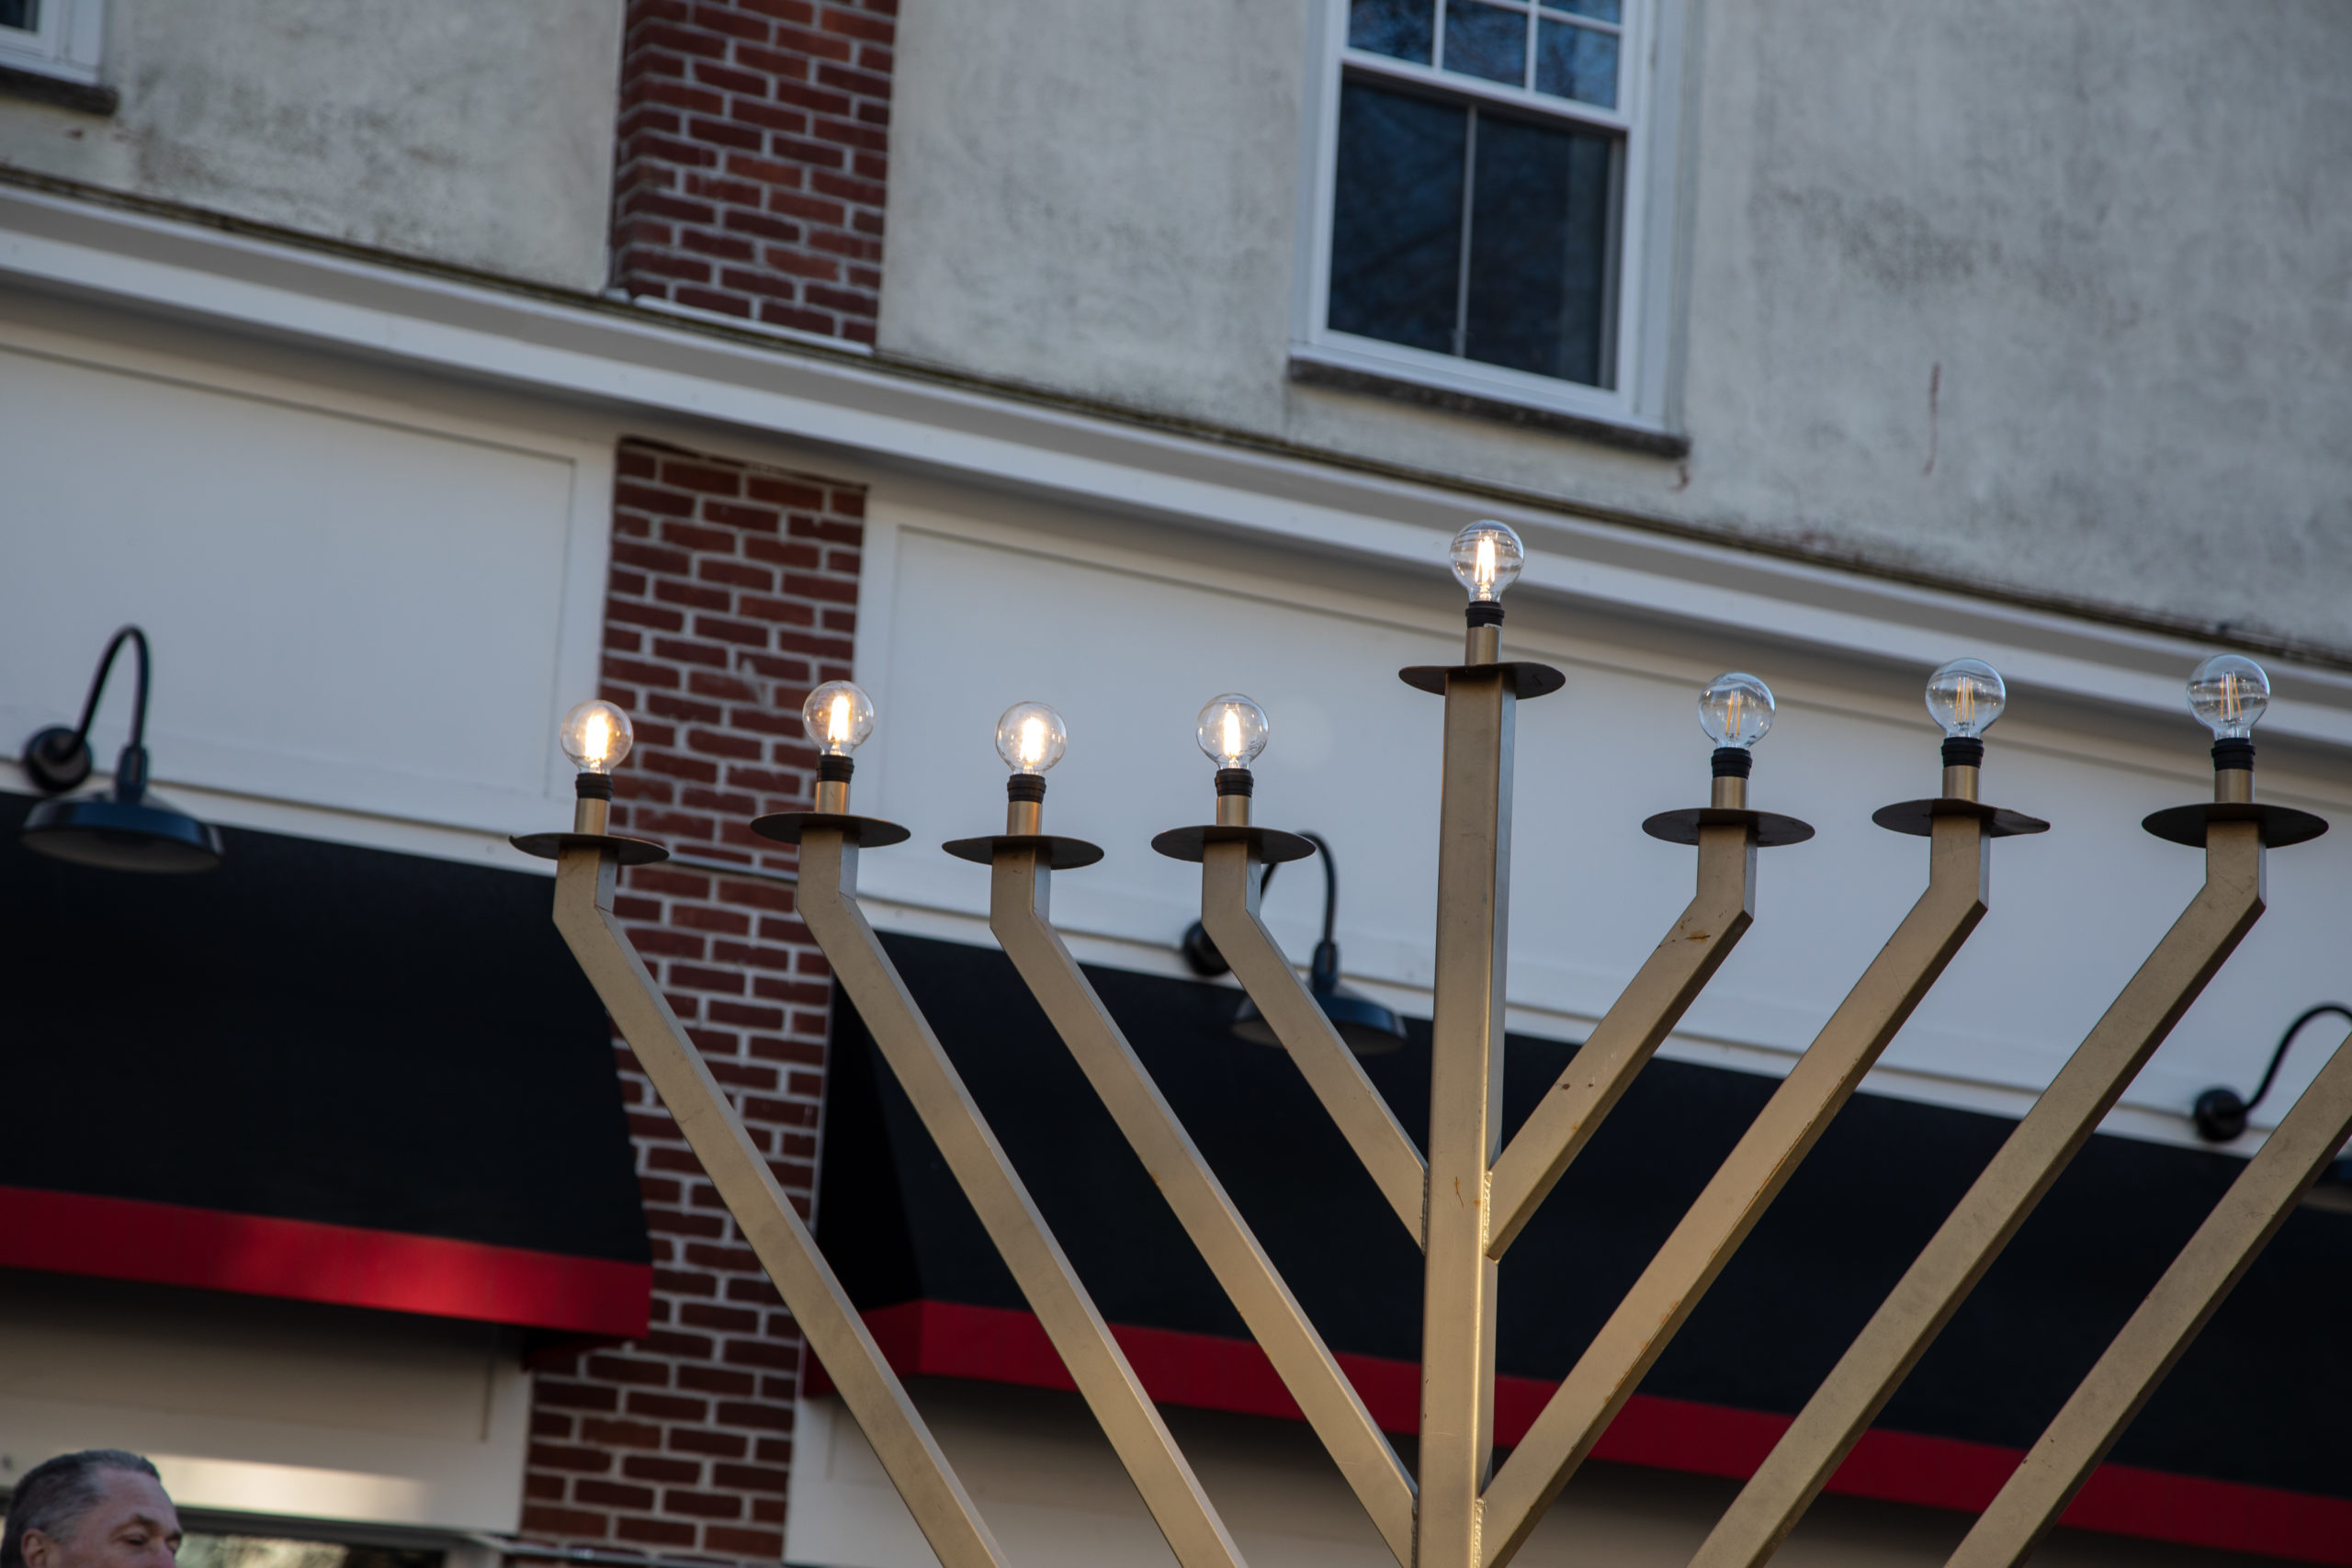 a large menorah with lit candles in front of a store.